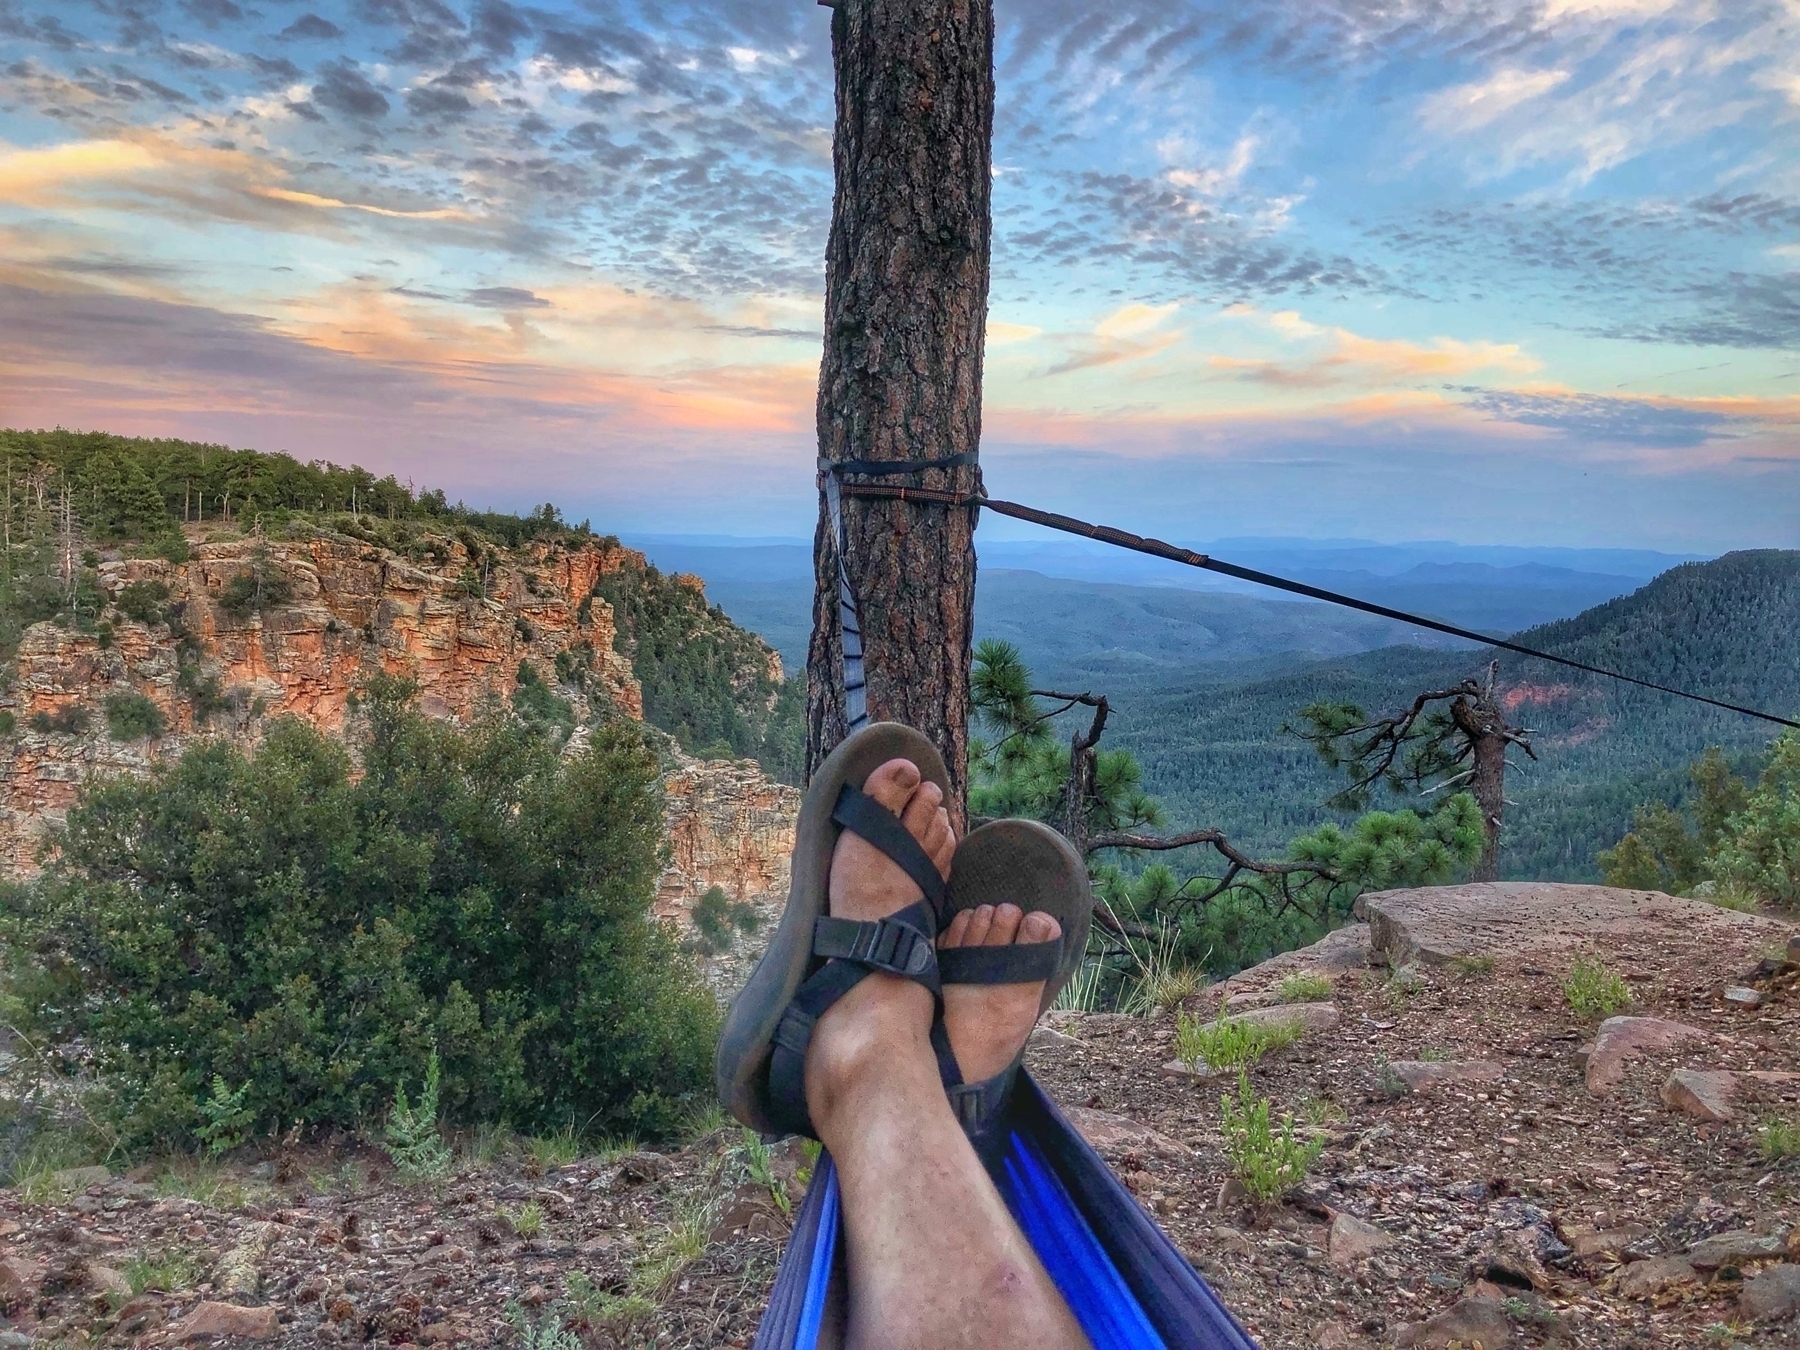 View from the feet of someone lounging in a hammock near the edge of a cliff and a great vista 